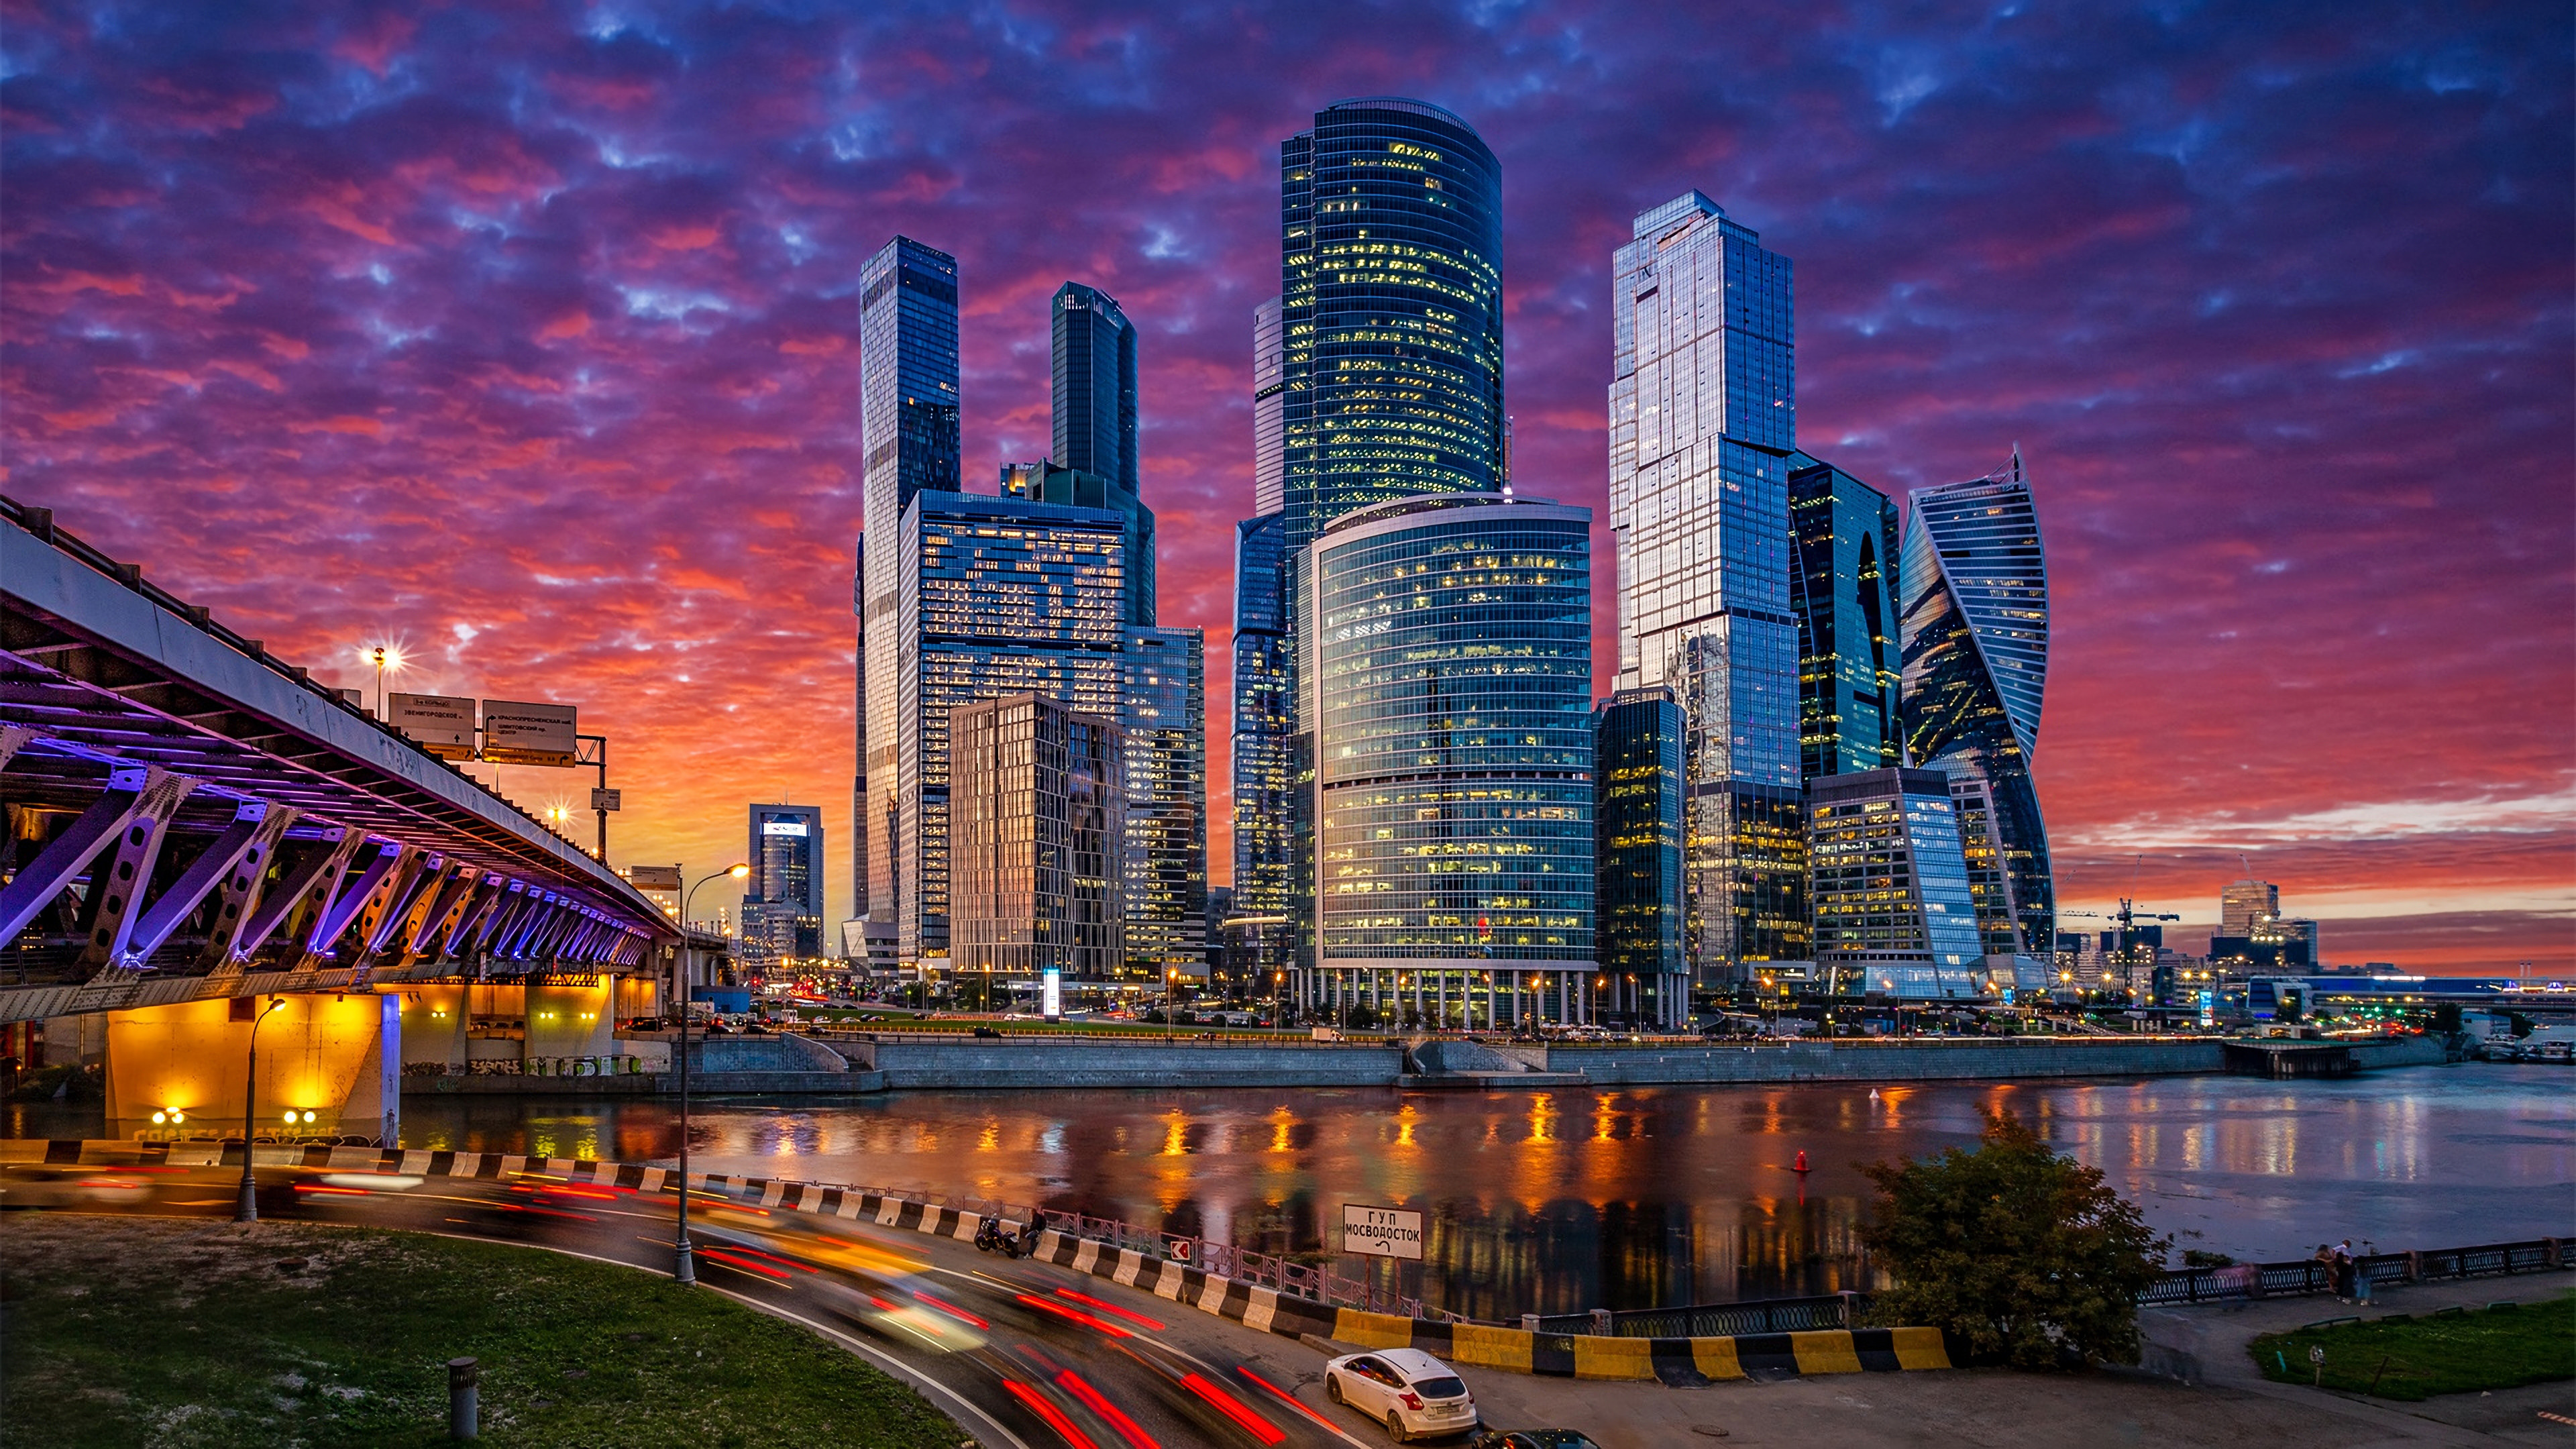 Moscow City Night - HD Wallpaper 